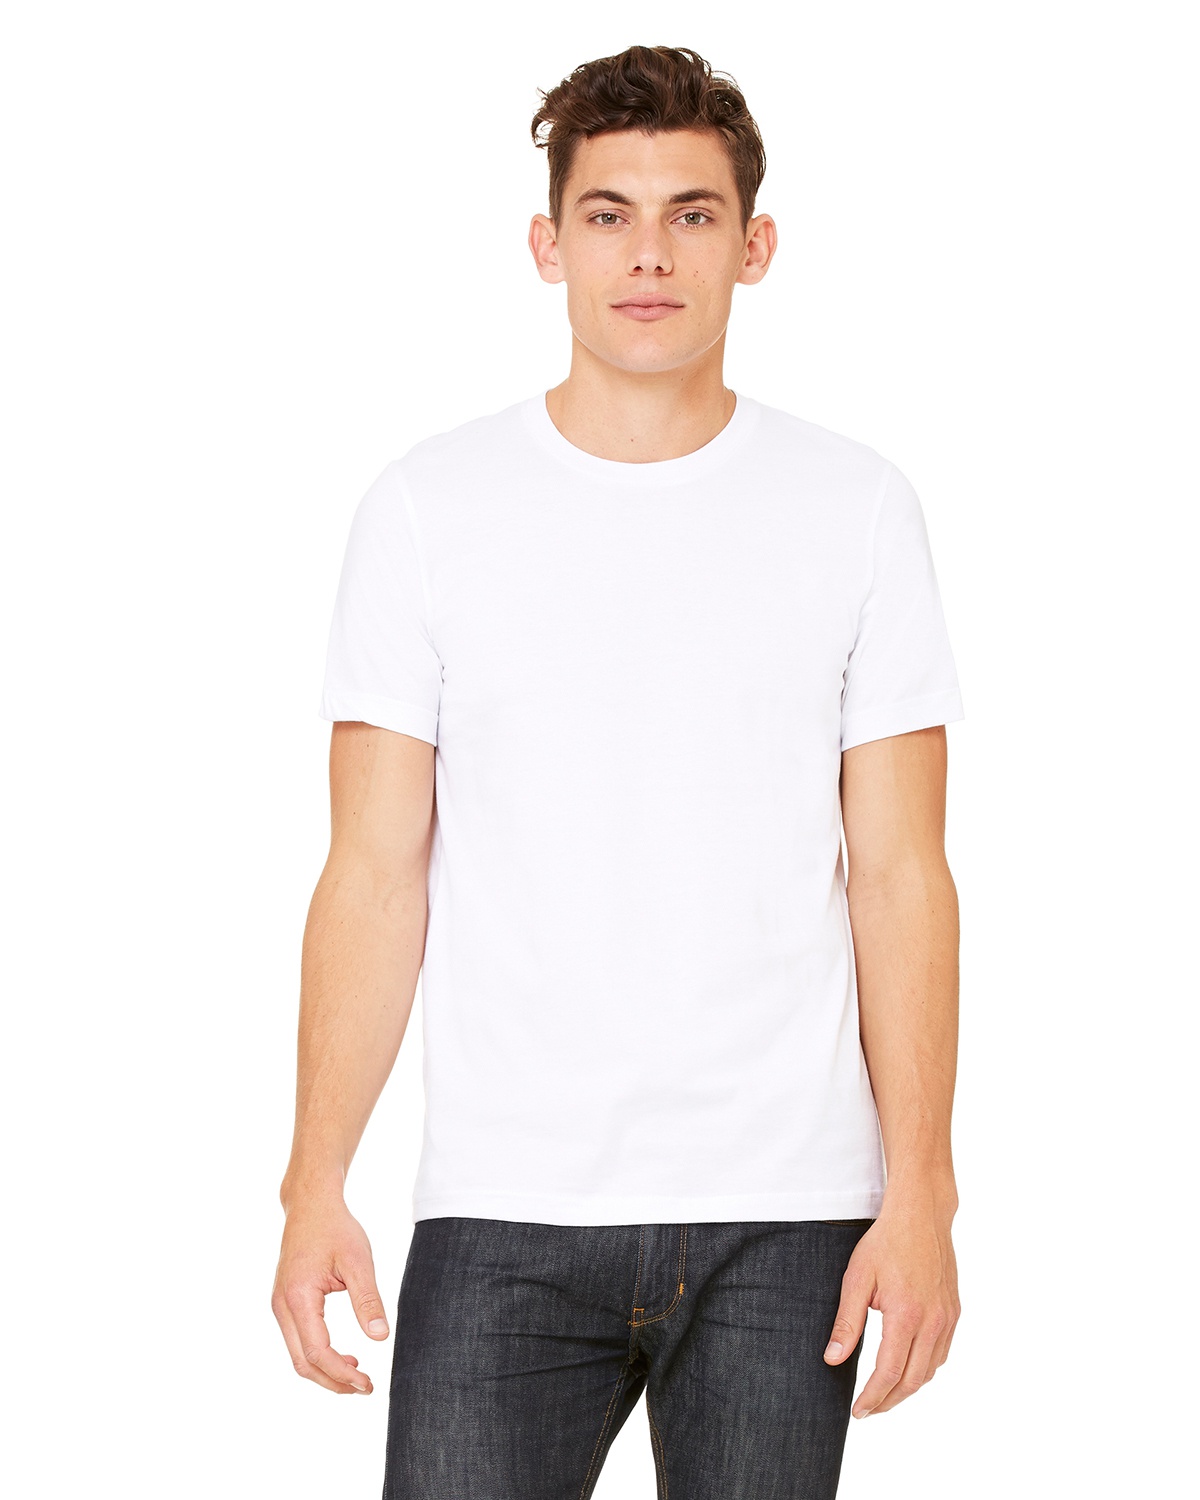 'Bella Canvas 3001U Unisex Made In The USA Jersey T Shirt'